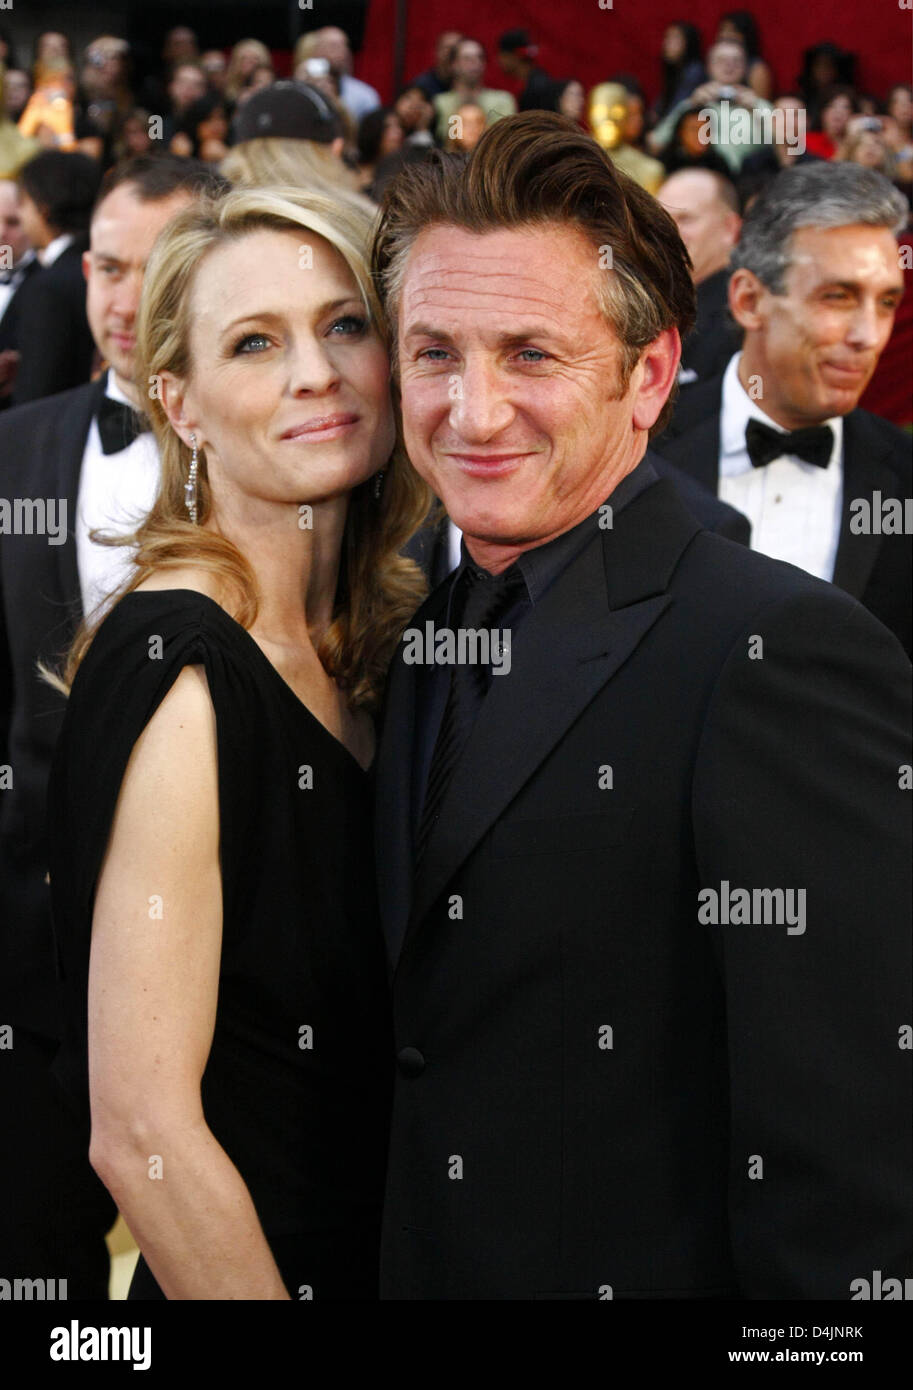 US actors Sean Penn and his wife Robin Wright Penn arrive on the red carpet for the 81st Academy Awards at the Kodak Theatre in Hollywood, California, USA, 22 February 2009. Sean Penn won the Oscar as best actor in a leading role for his role in the film ?Milk?. The Academy Awards, popularly known as the Oscars, honour excellence in cinema. Photo: Hubert Boesl Stock Photo